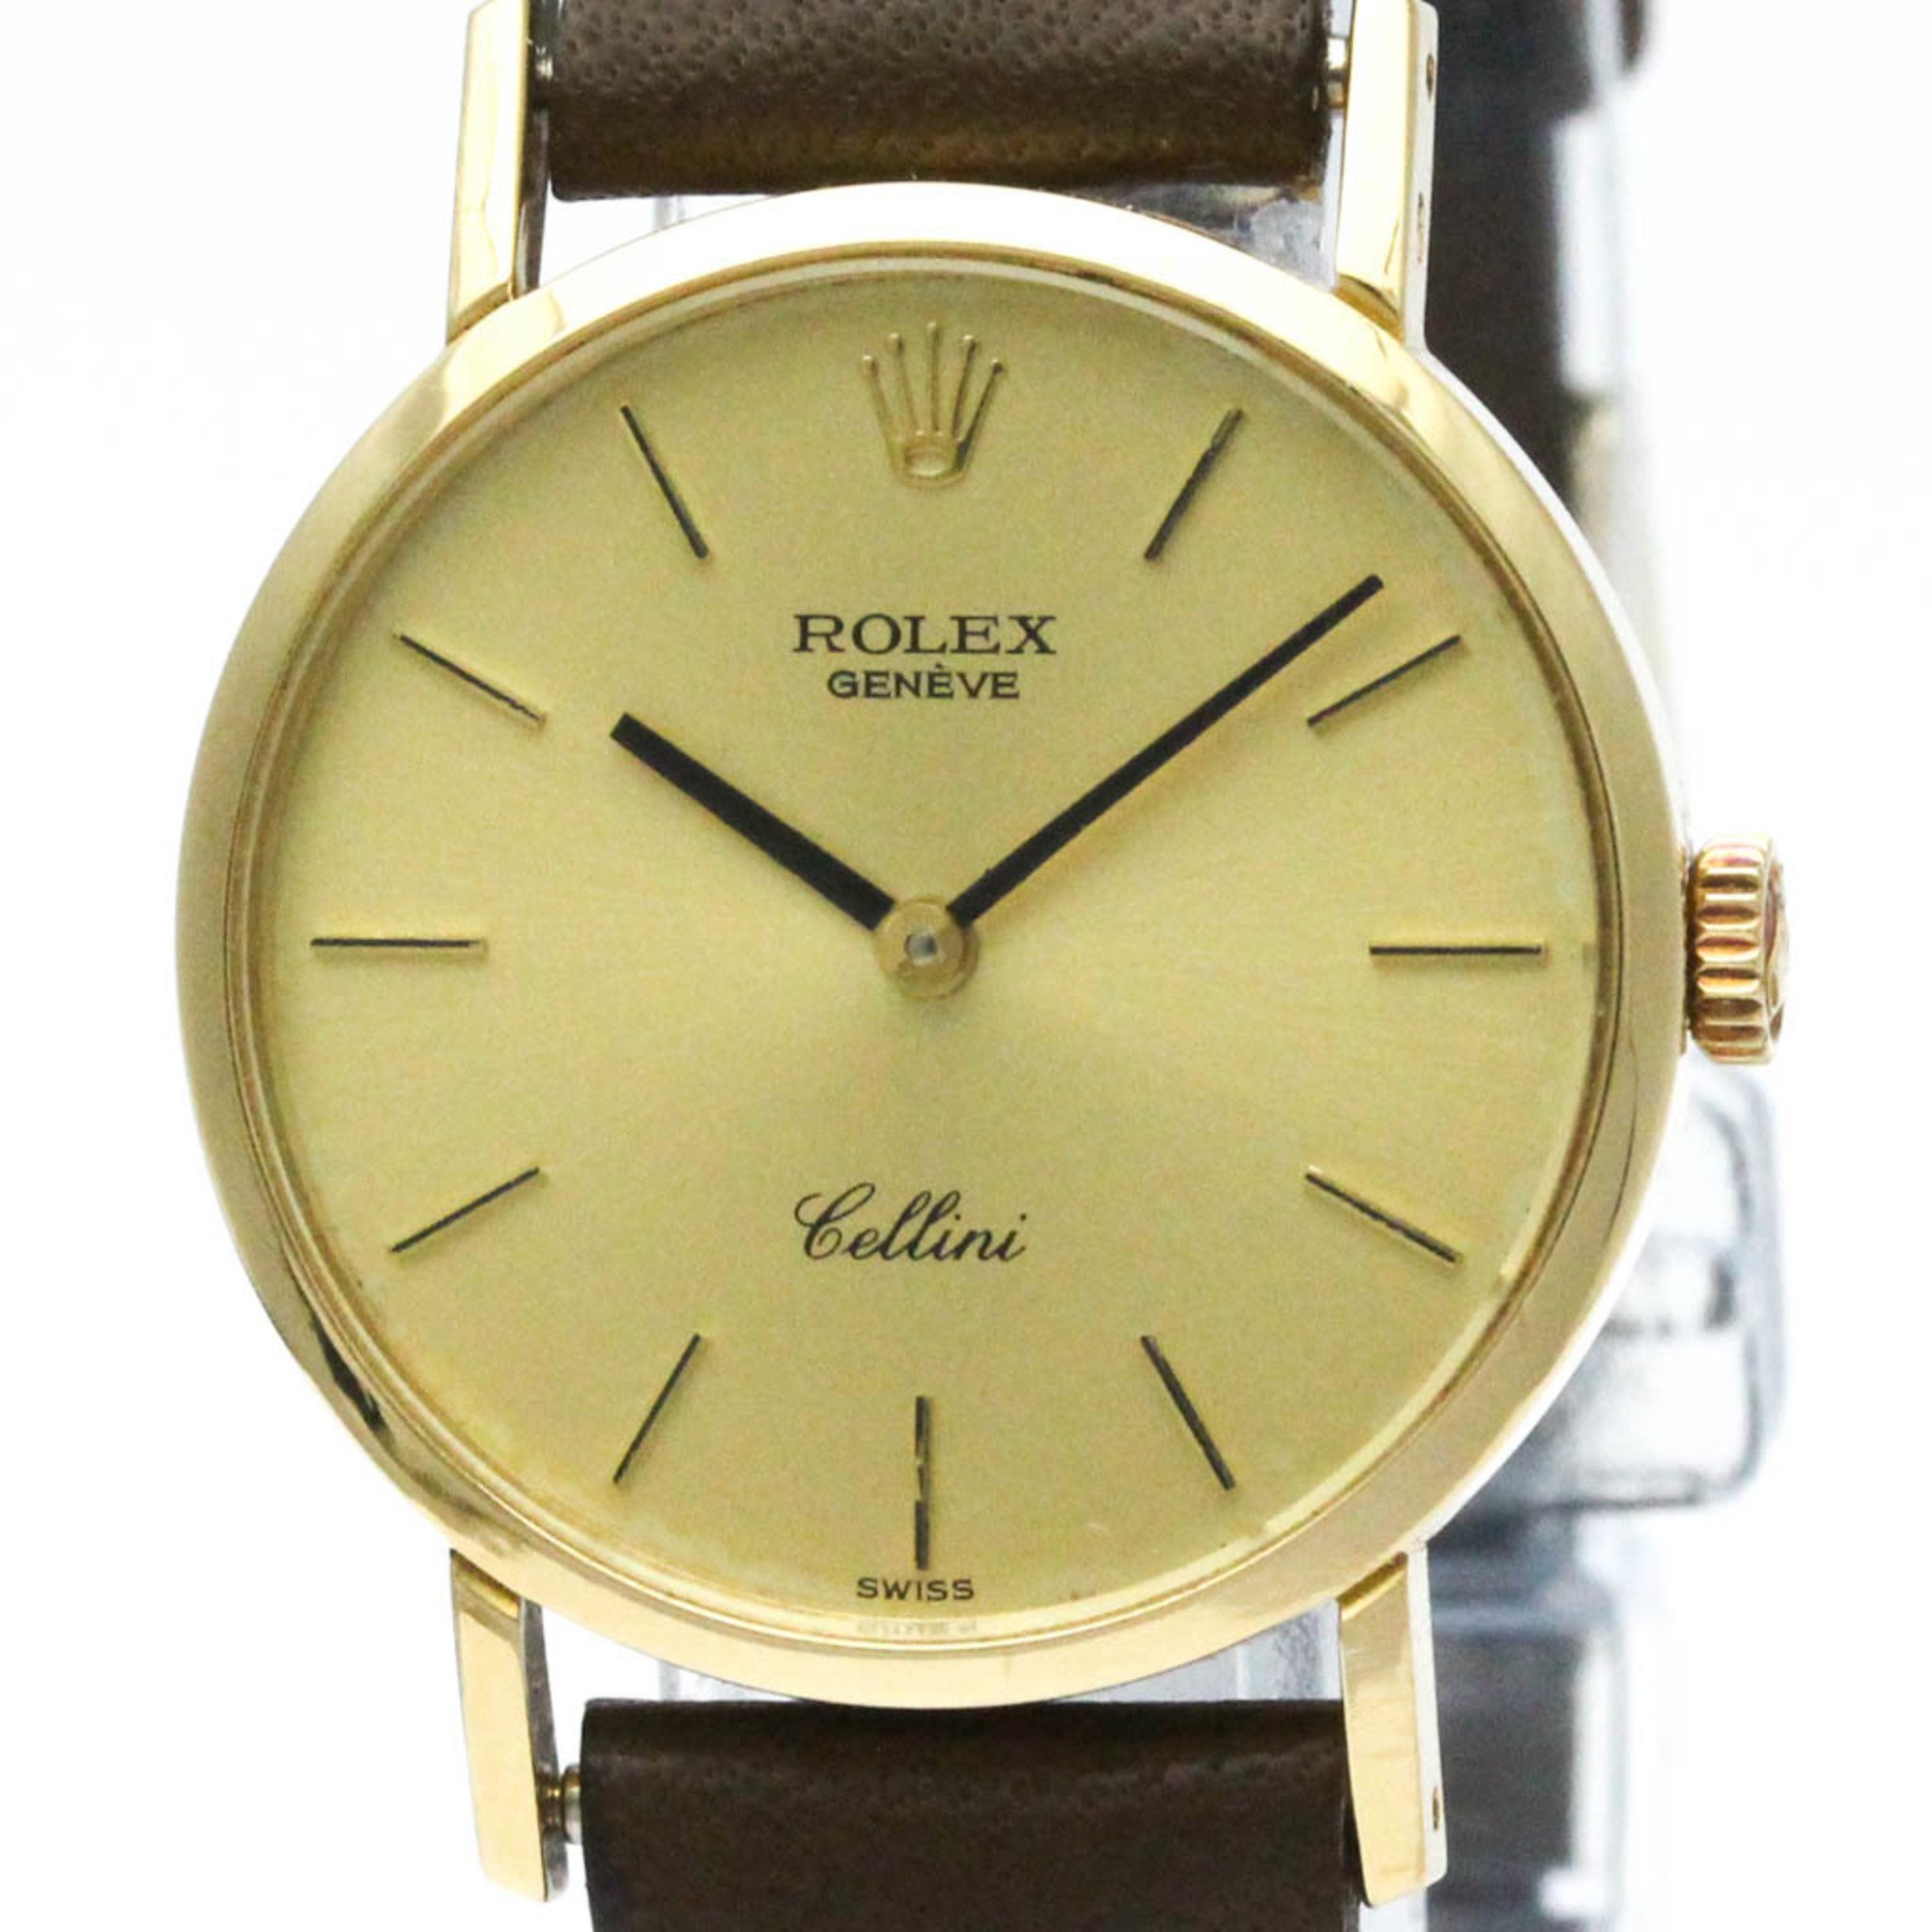 Vintage ROLEX Cellini 18K Gold Leather Hand-Winding Ladies Watch 4109 BF560569